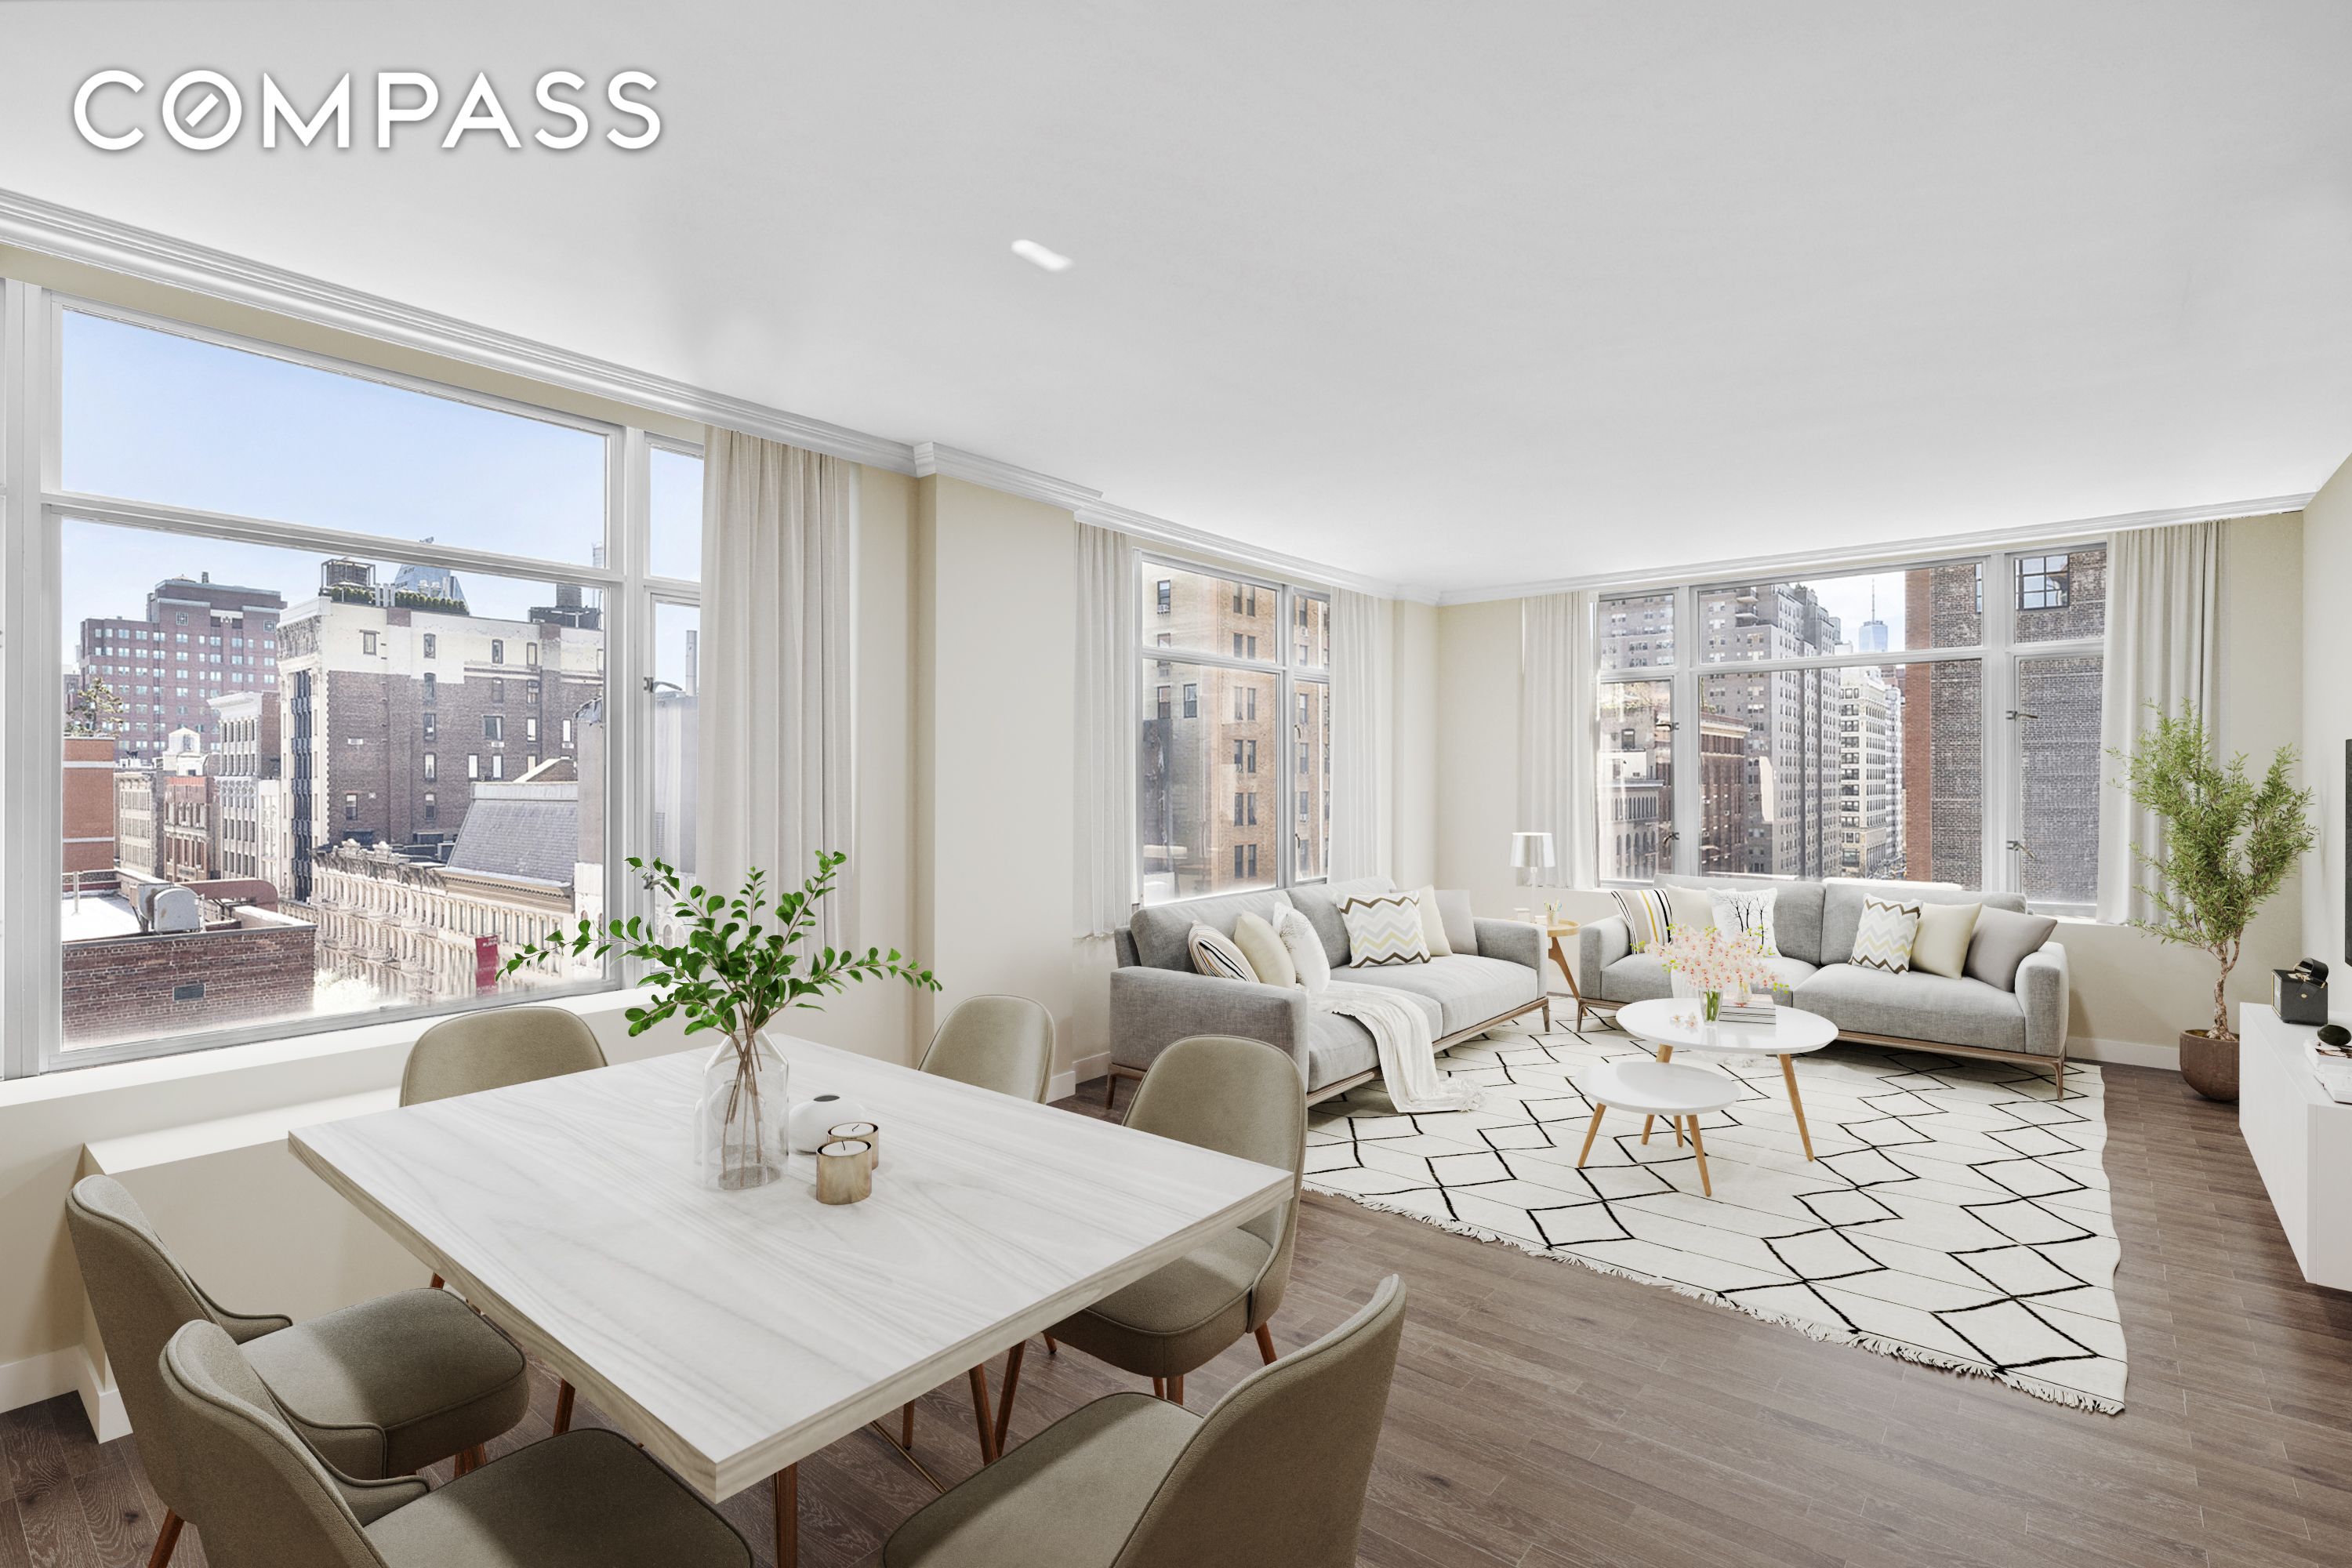 201 West 17th Street 8B, Chelsea, Downtown, NYC - 3 Bedrooms  
2.5 Bathrooms  
7 Rooms - 